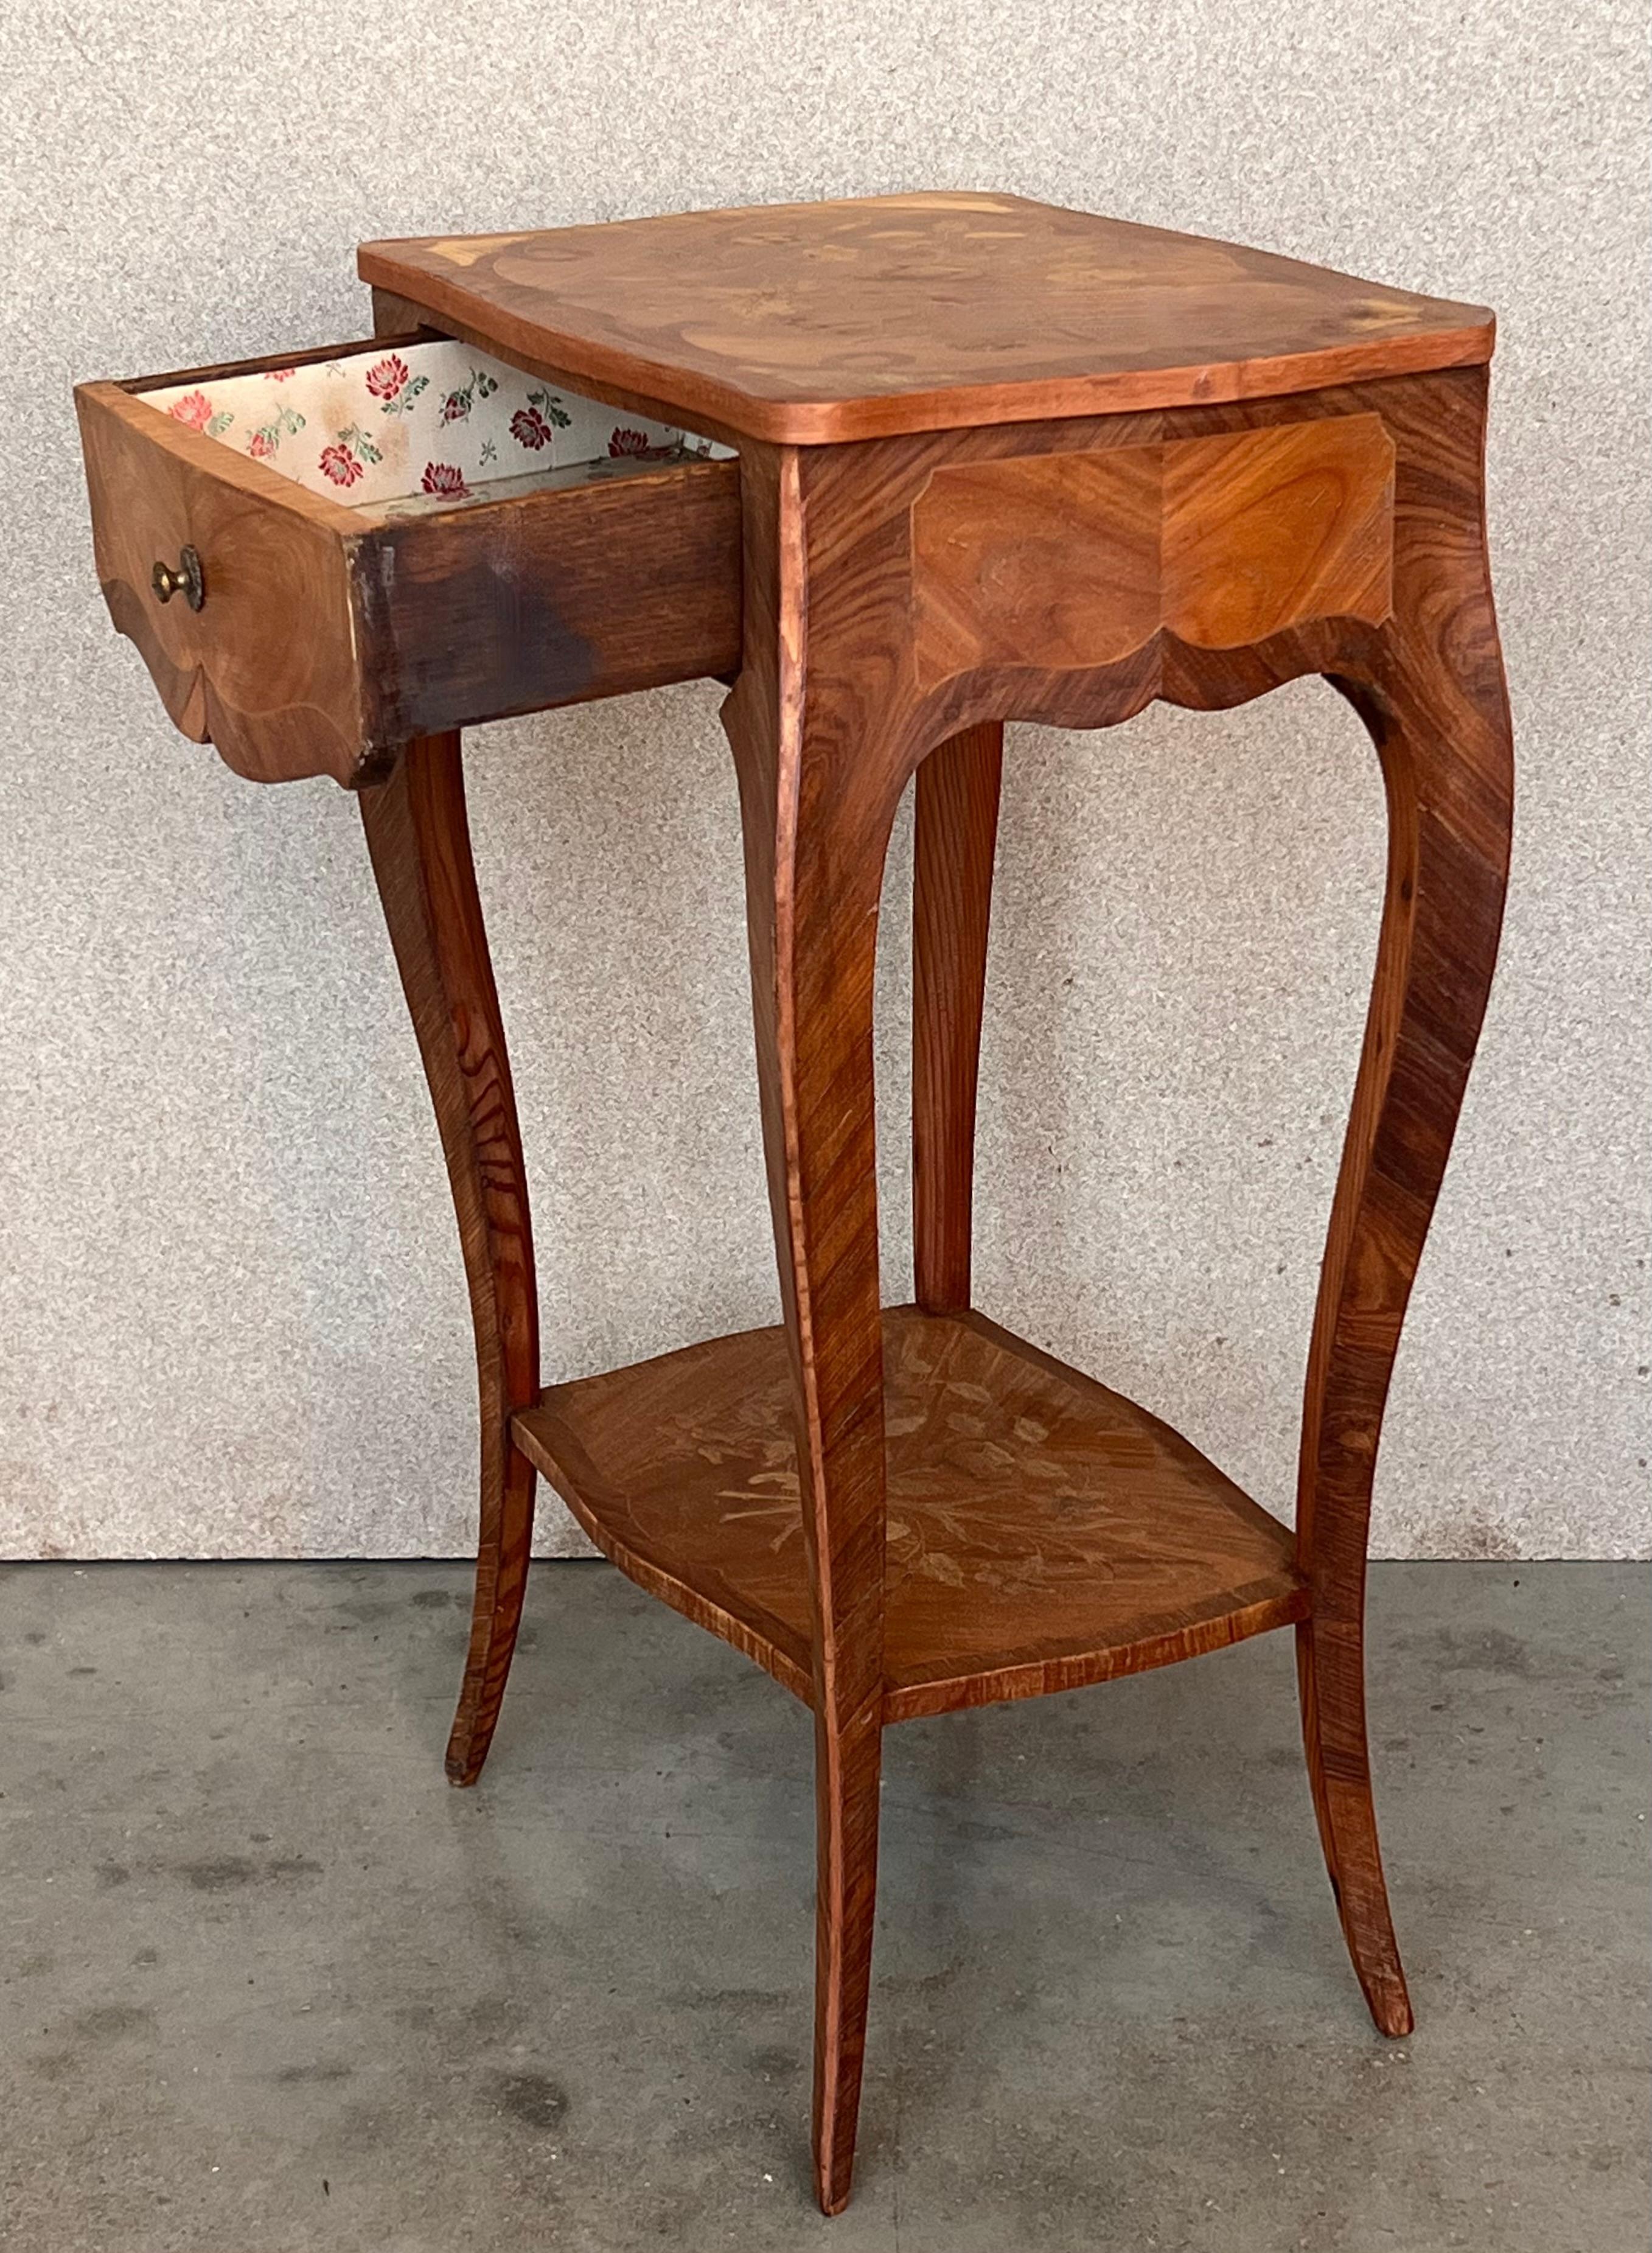 A very fine Louis XV French Style side tables or nightstands with elegant marquetry work, all original restored. This sumptuous side tables have a distinctively shaped rectangular marquetry top. The body is beautifully decorated with ornate floral